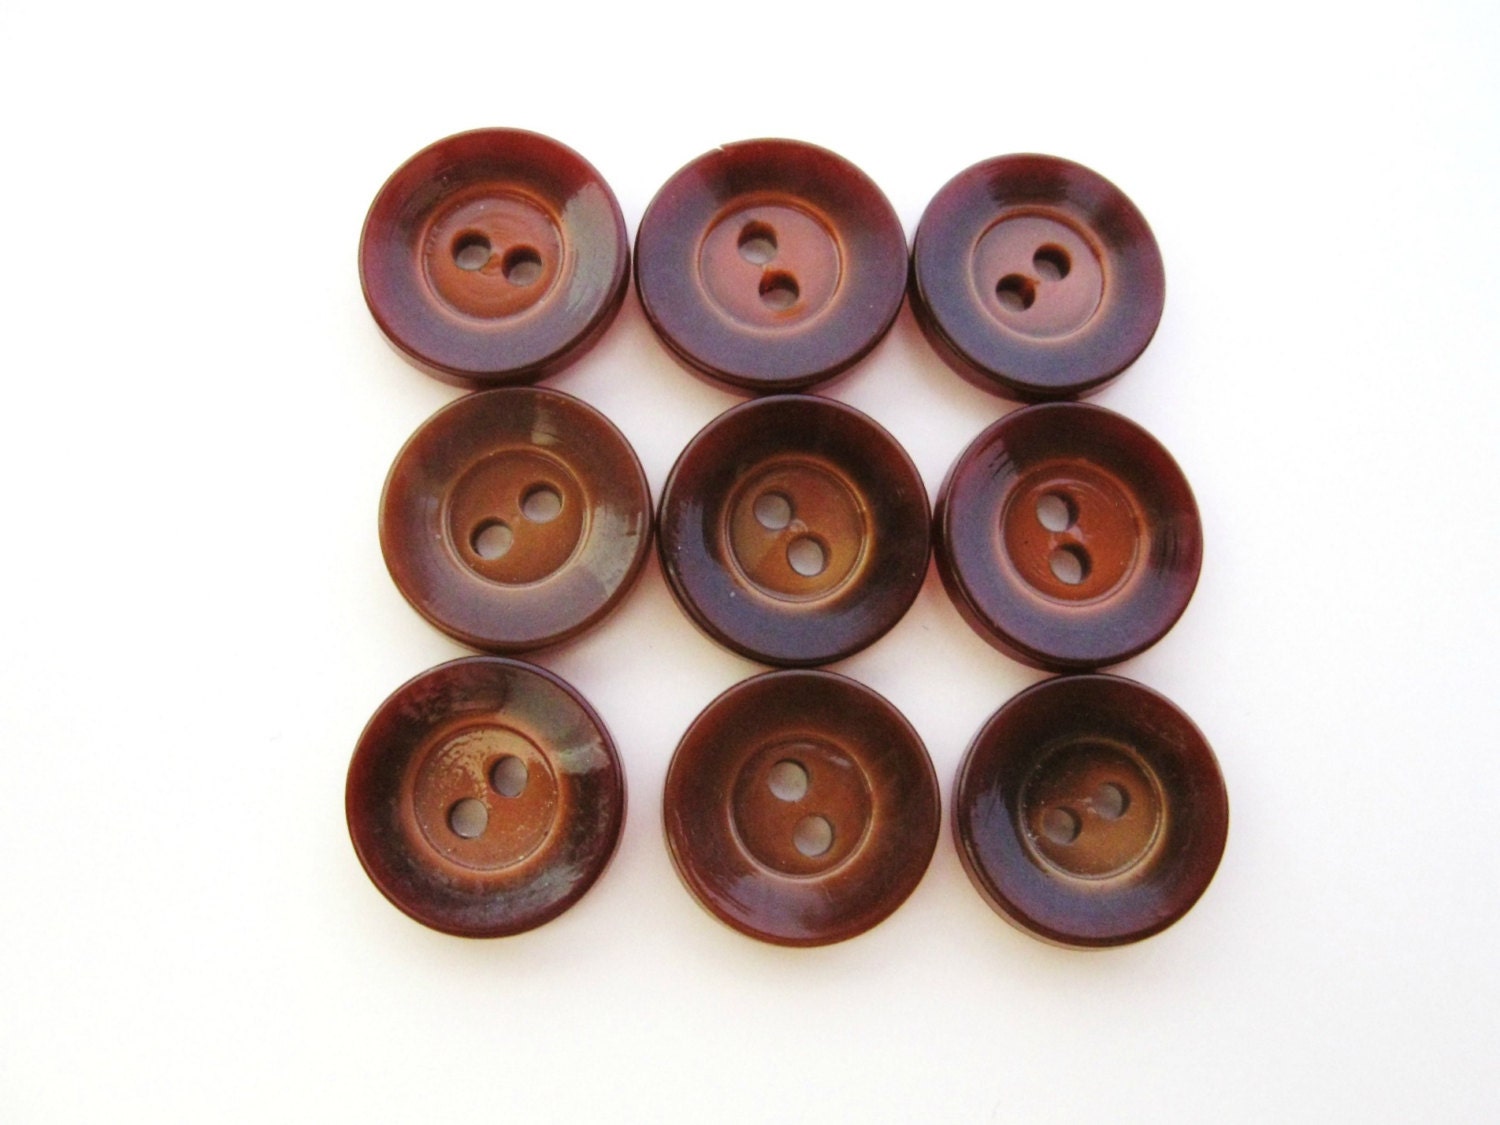 Brown Buttons set of nine by BonitaBellitaEtc on Etsy